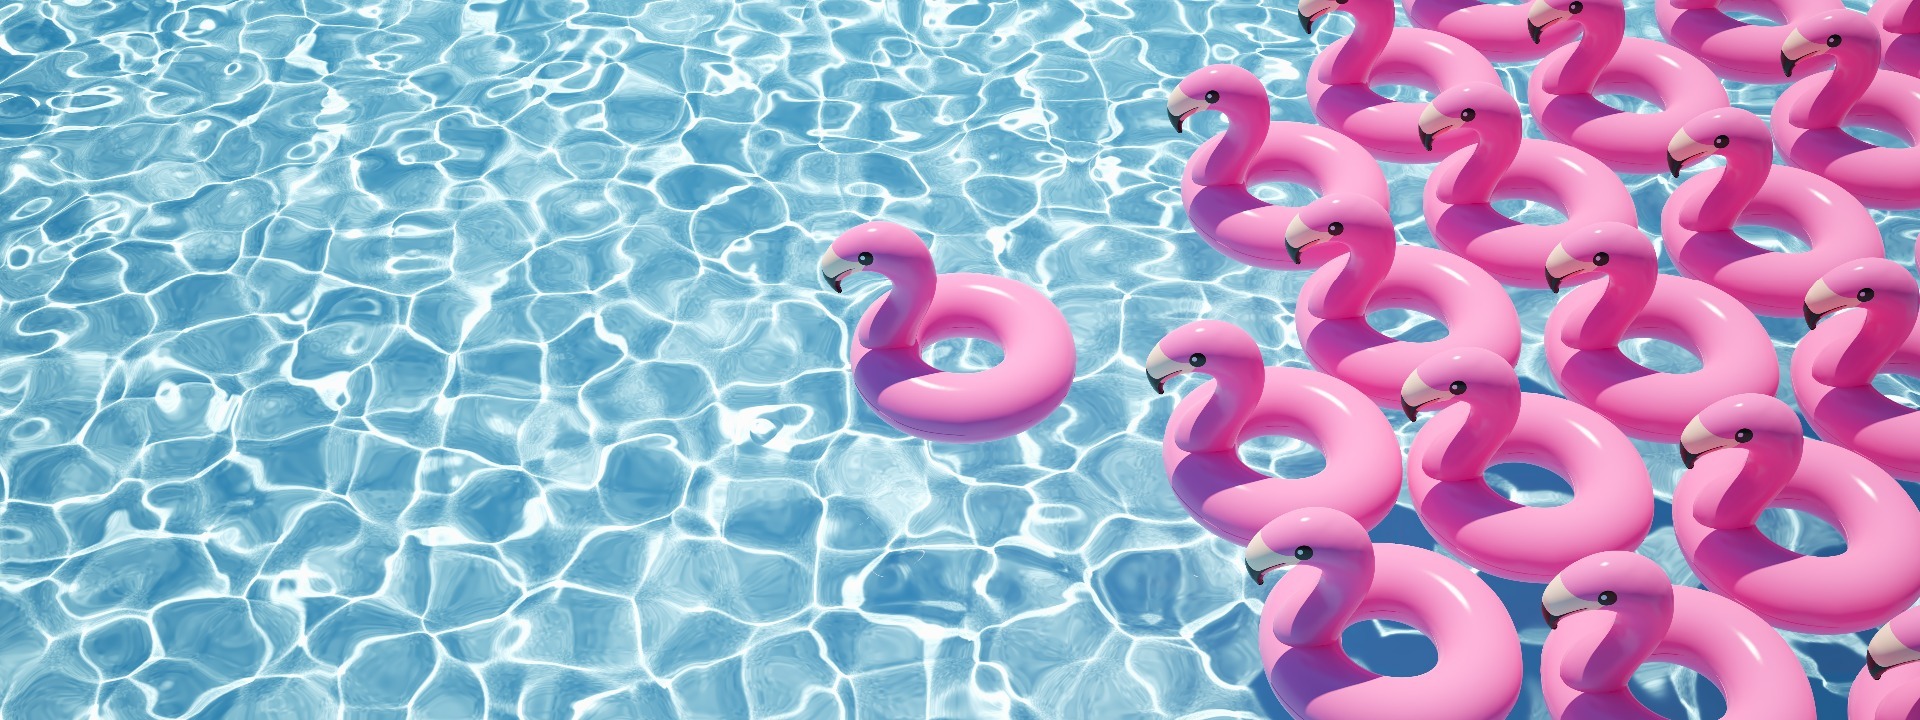 A blue pool, with lots of pink flamingo floats